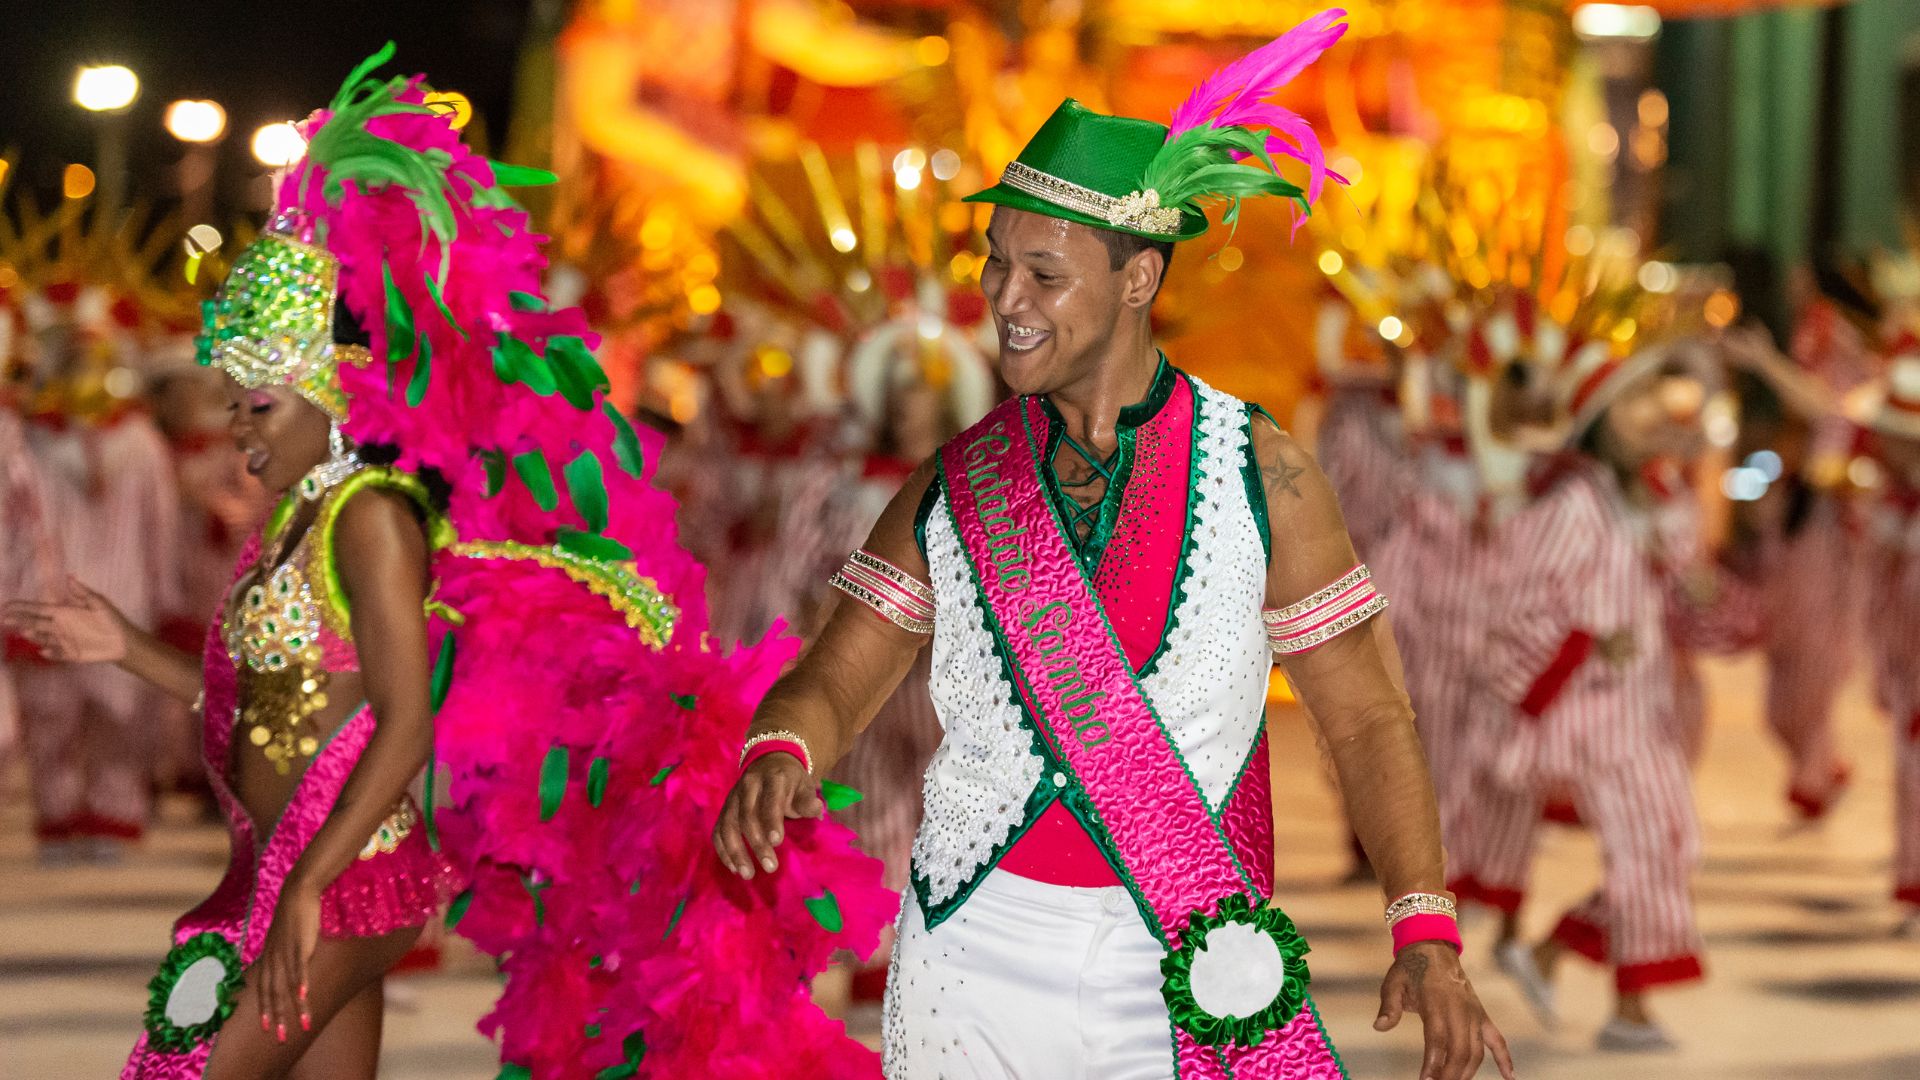 15 Things you NEED to Know Before Attending Carnival in Brazil